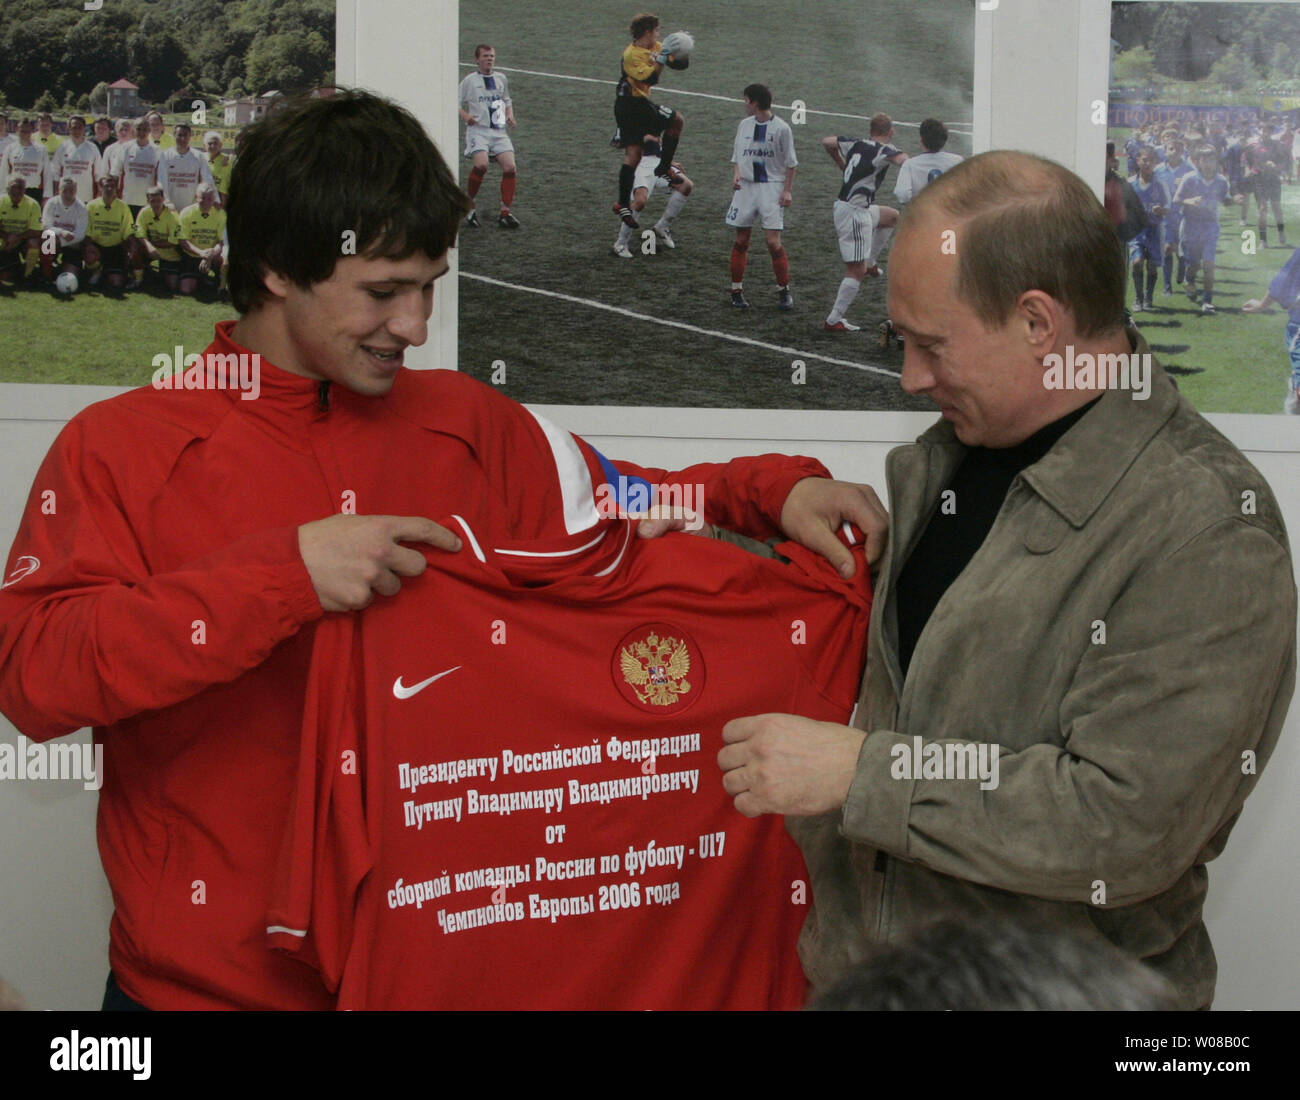 Russian President Vladimir Putin (R) gets a gift, T-shirt from the youth soccer team Sputnik in the Black Sea city of Sochi on May 19, 2006. This team won European championship this May. (UPI Photo/Anatoli Zhdanov) Stock Photo